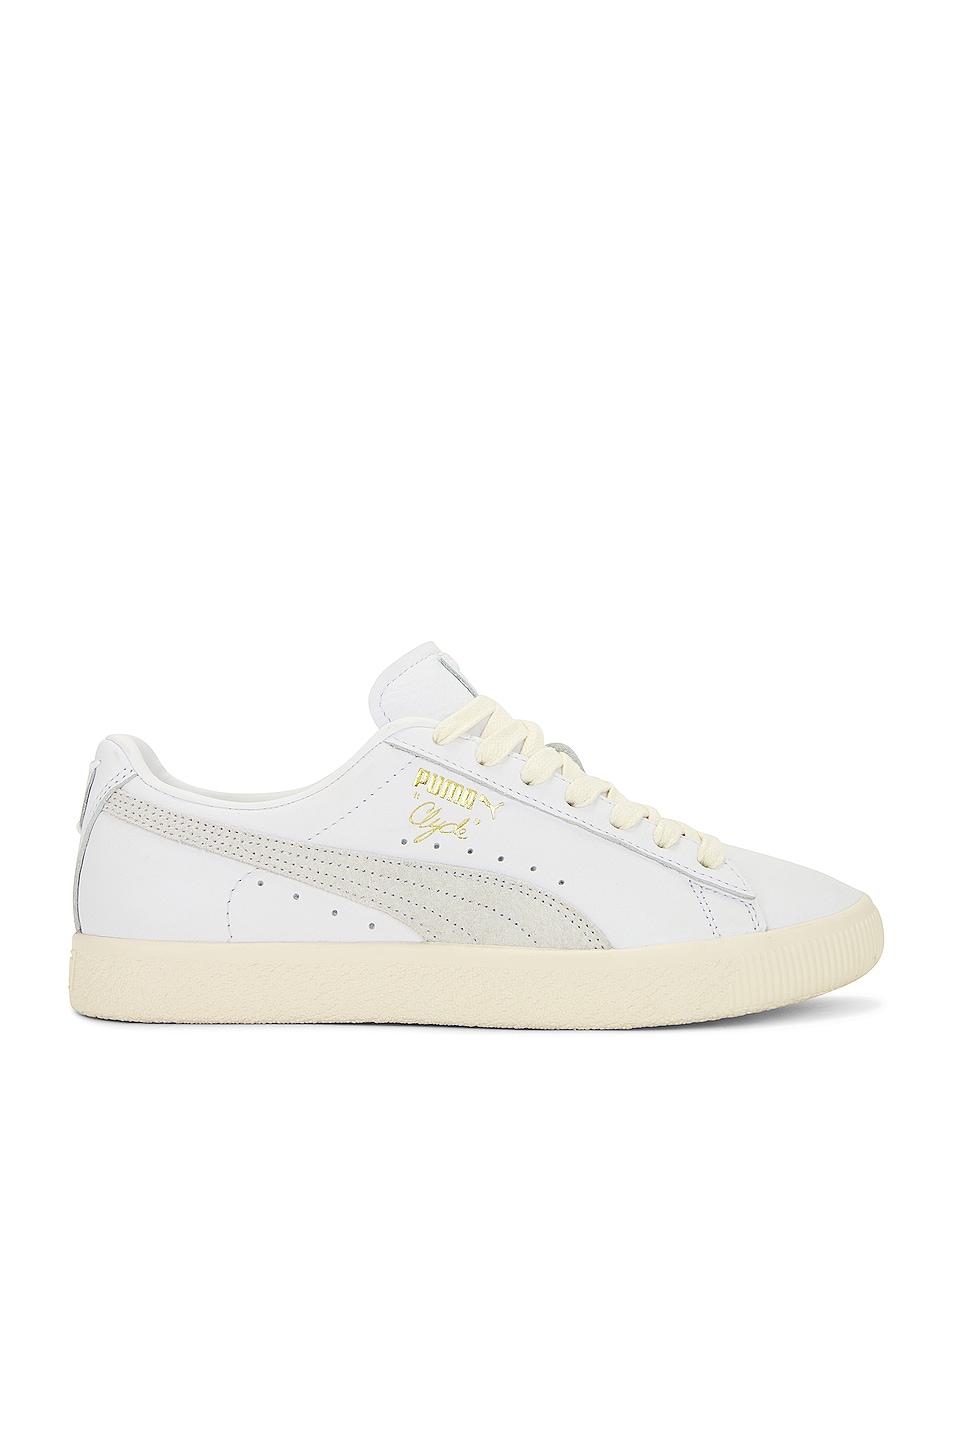 Image 1 of Puma Select Clyde Base Sneakers in Puma White, Frosted Ivory, & Puma Team Gold